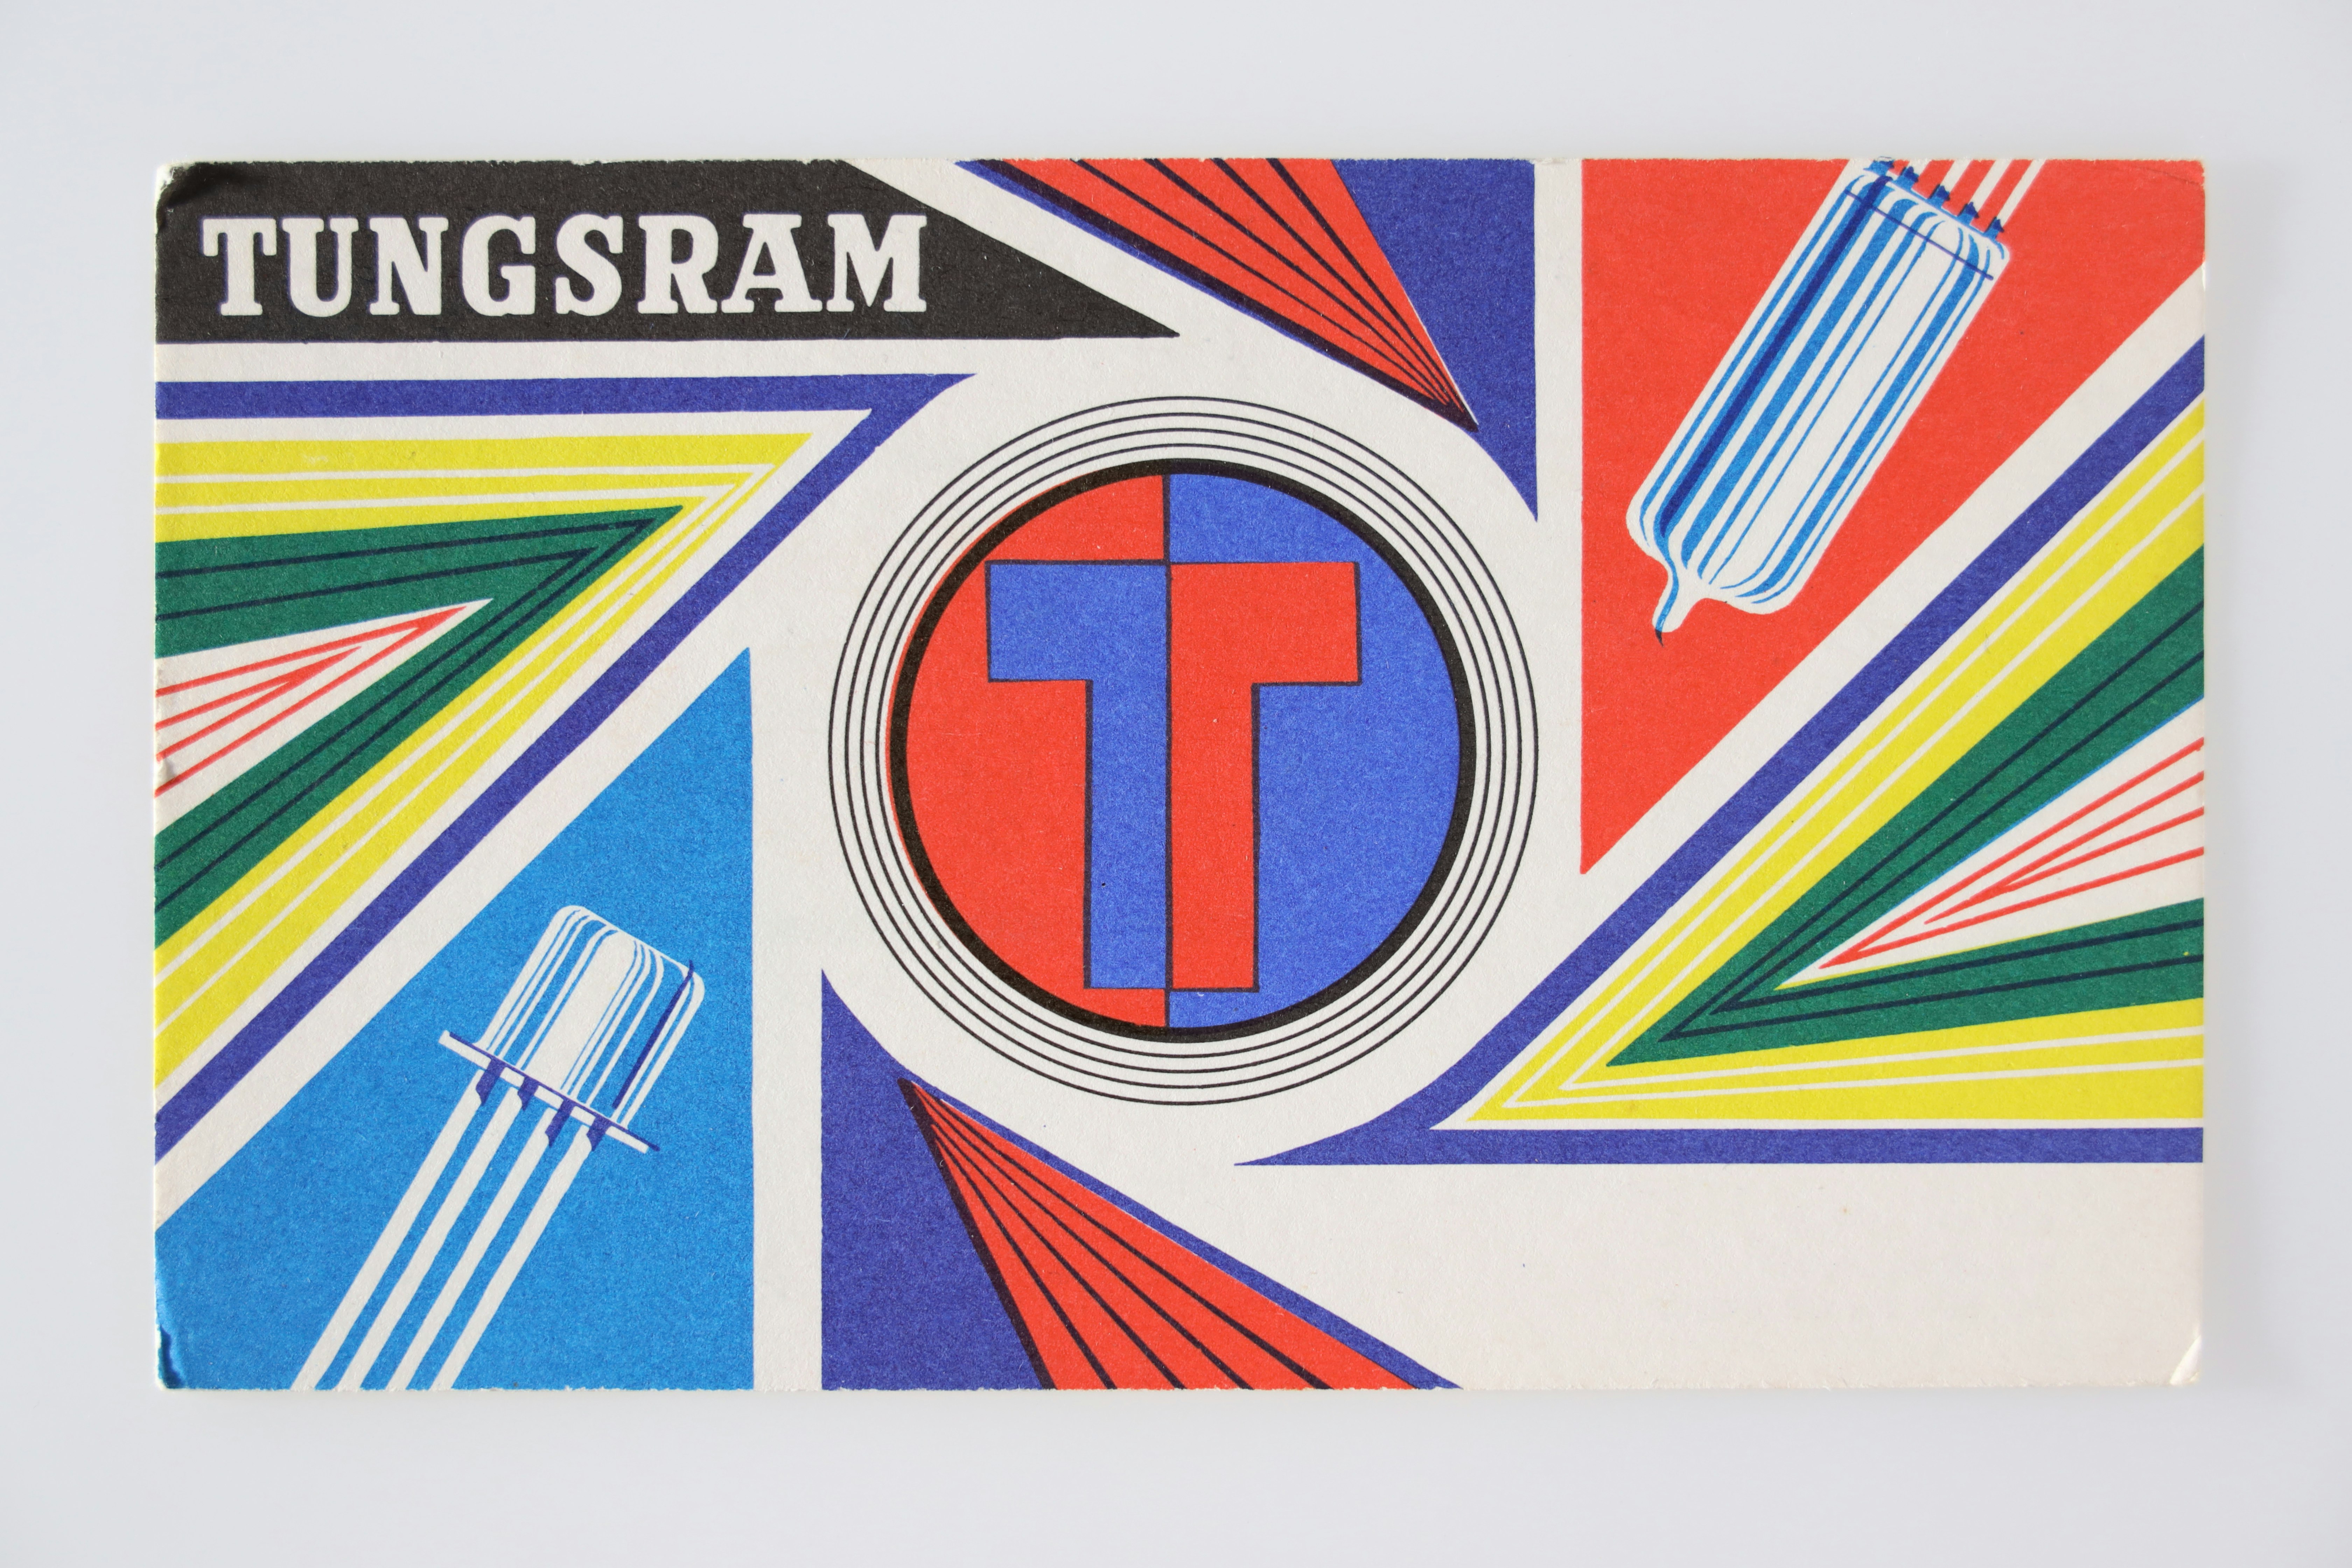 A rectangular card with graphic design elements in bright primary colors. In the center is the letter T in a circle, half blue and half red.